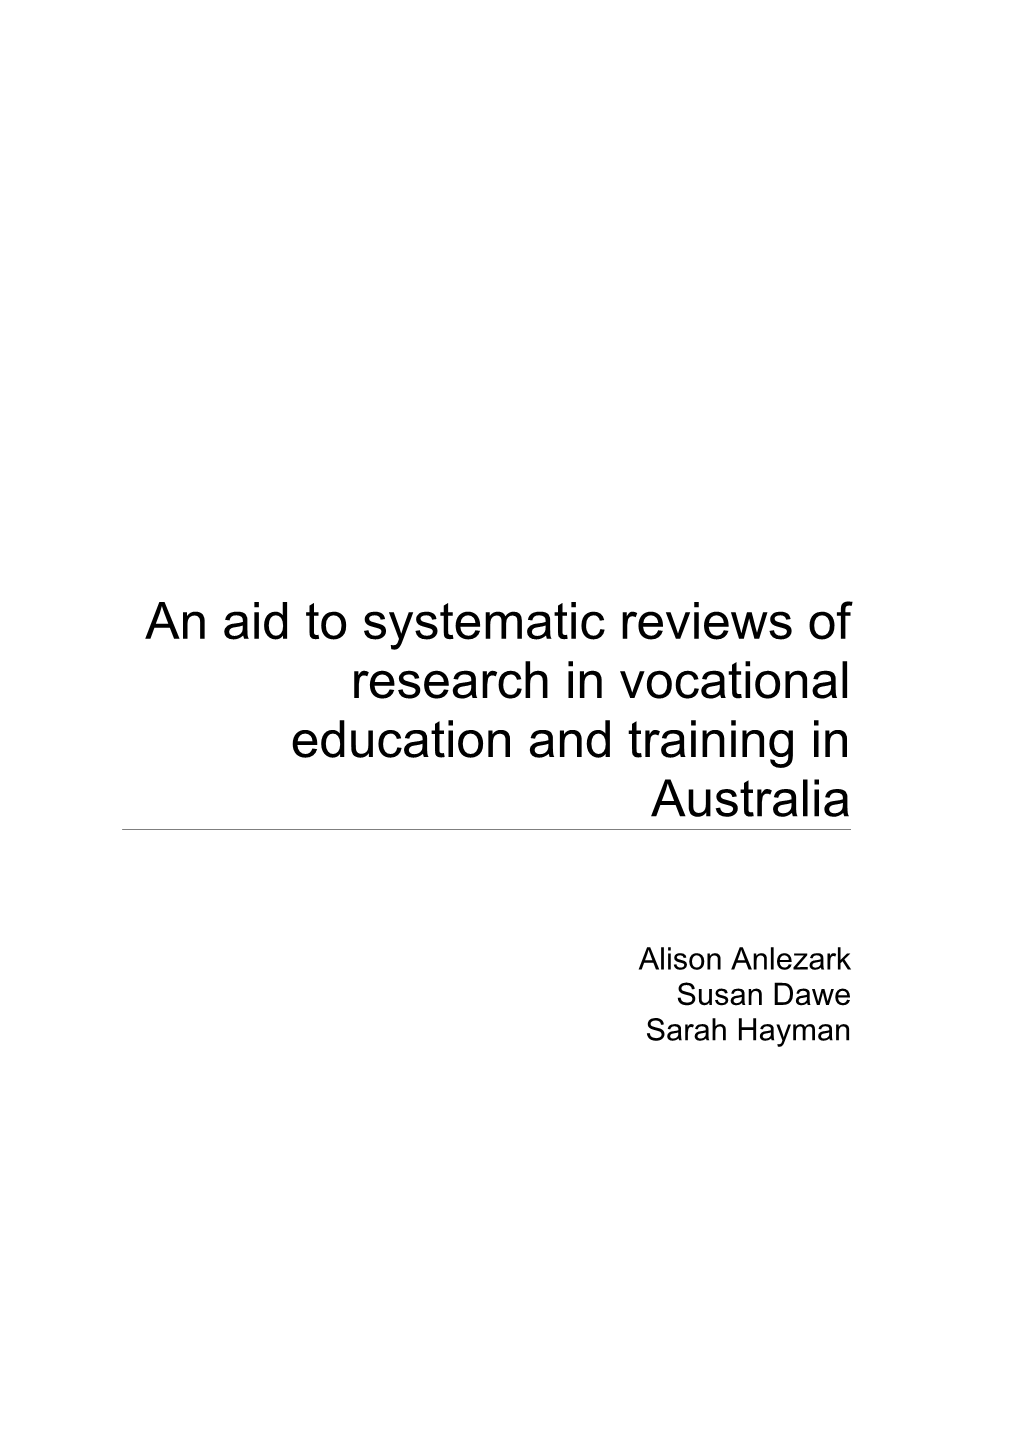 An Aid to Systematic Reviews of Research in VET in Australia